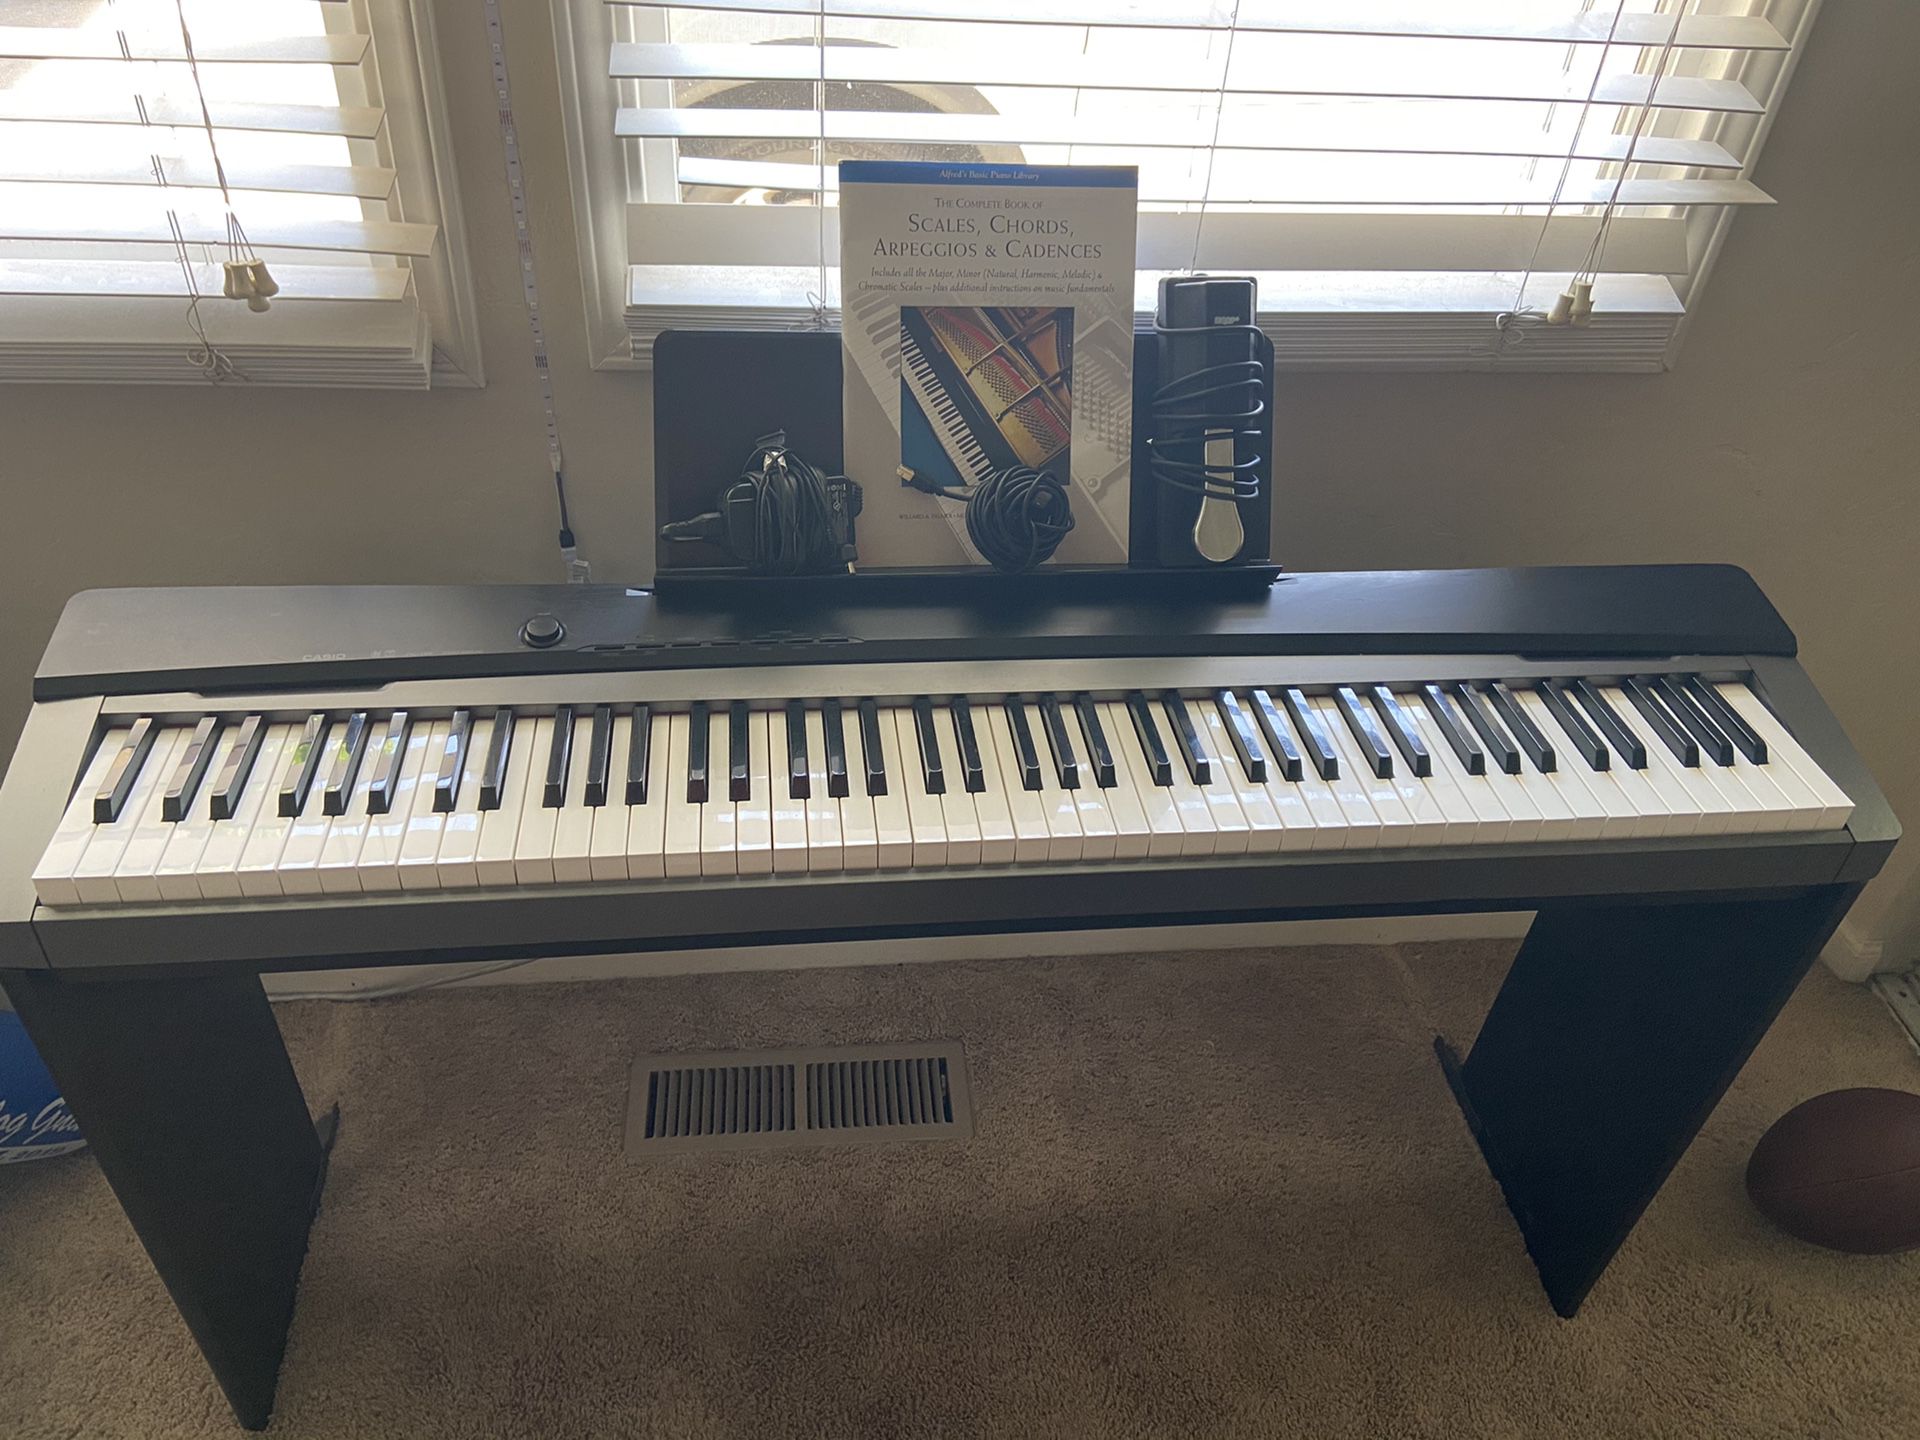 Casio PX-130 Keyboard With Keyboard Stand, Music Stand, Book, Pedal, Power Cord and Computer Cable